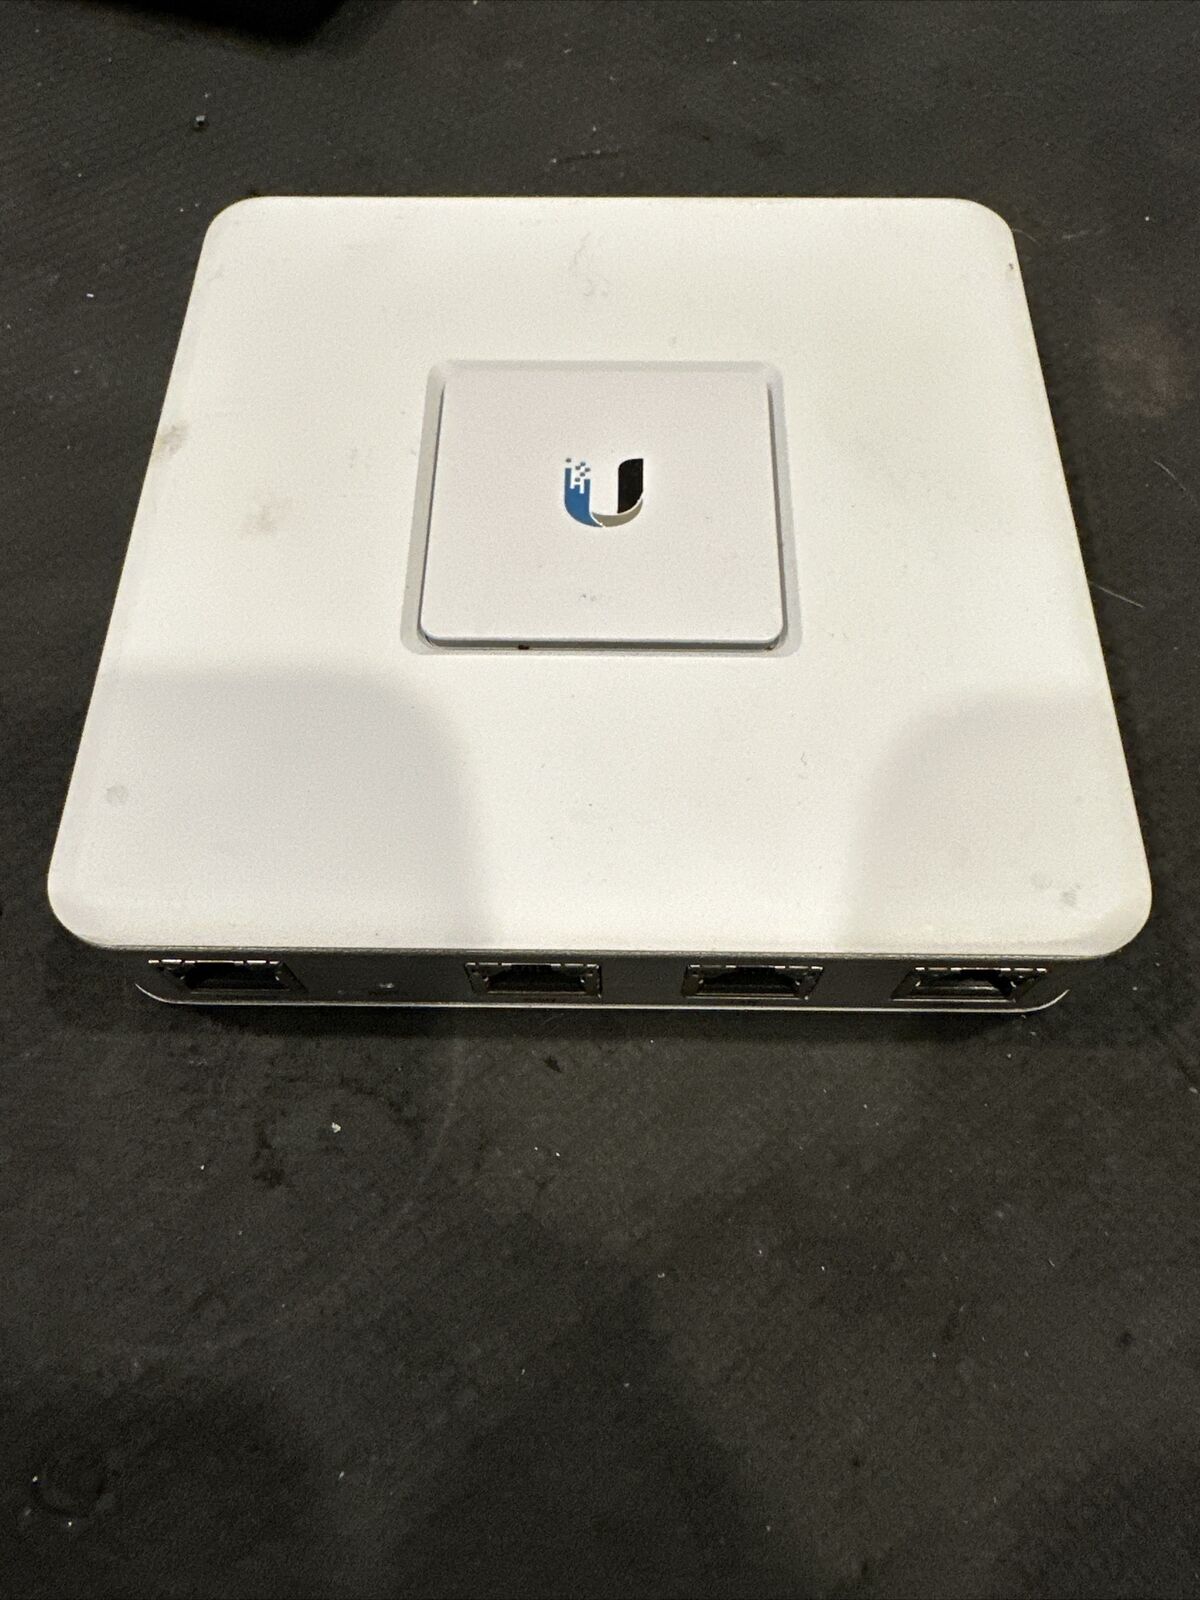 Ubiquiti Networks USG Unifi Security Gateway Router/Firewall - Used